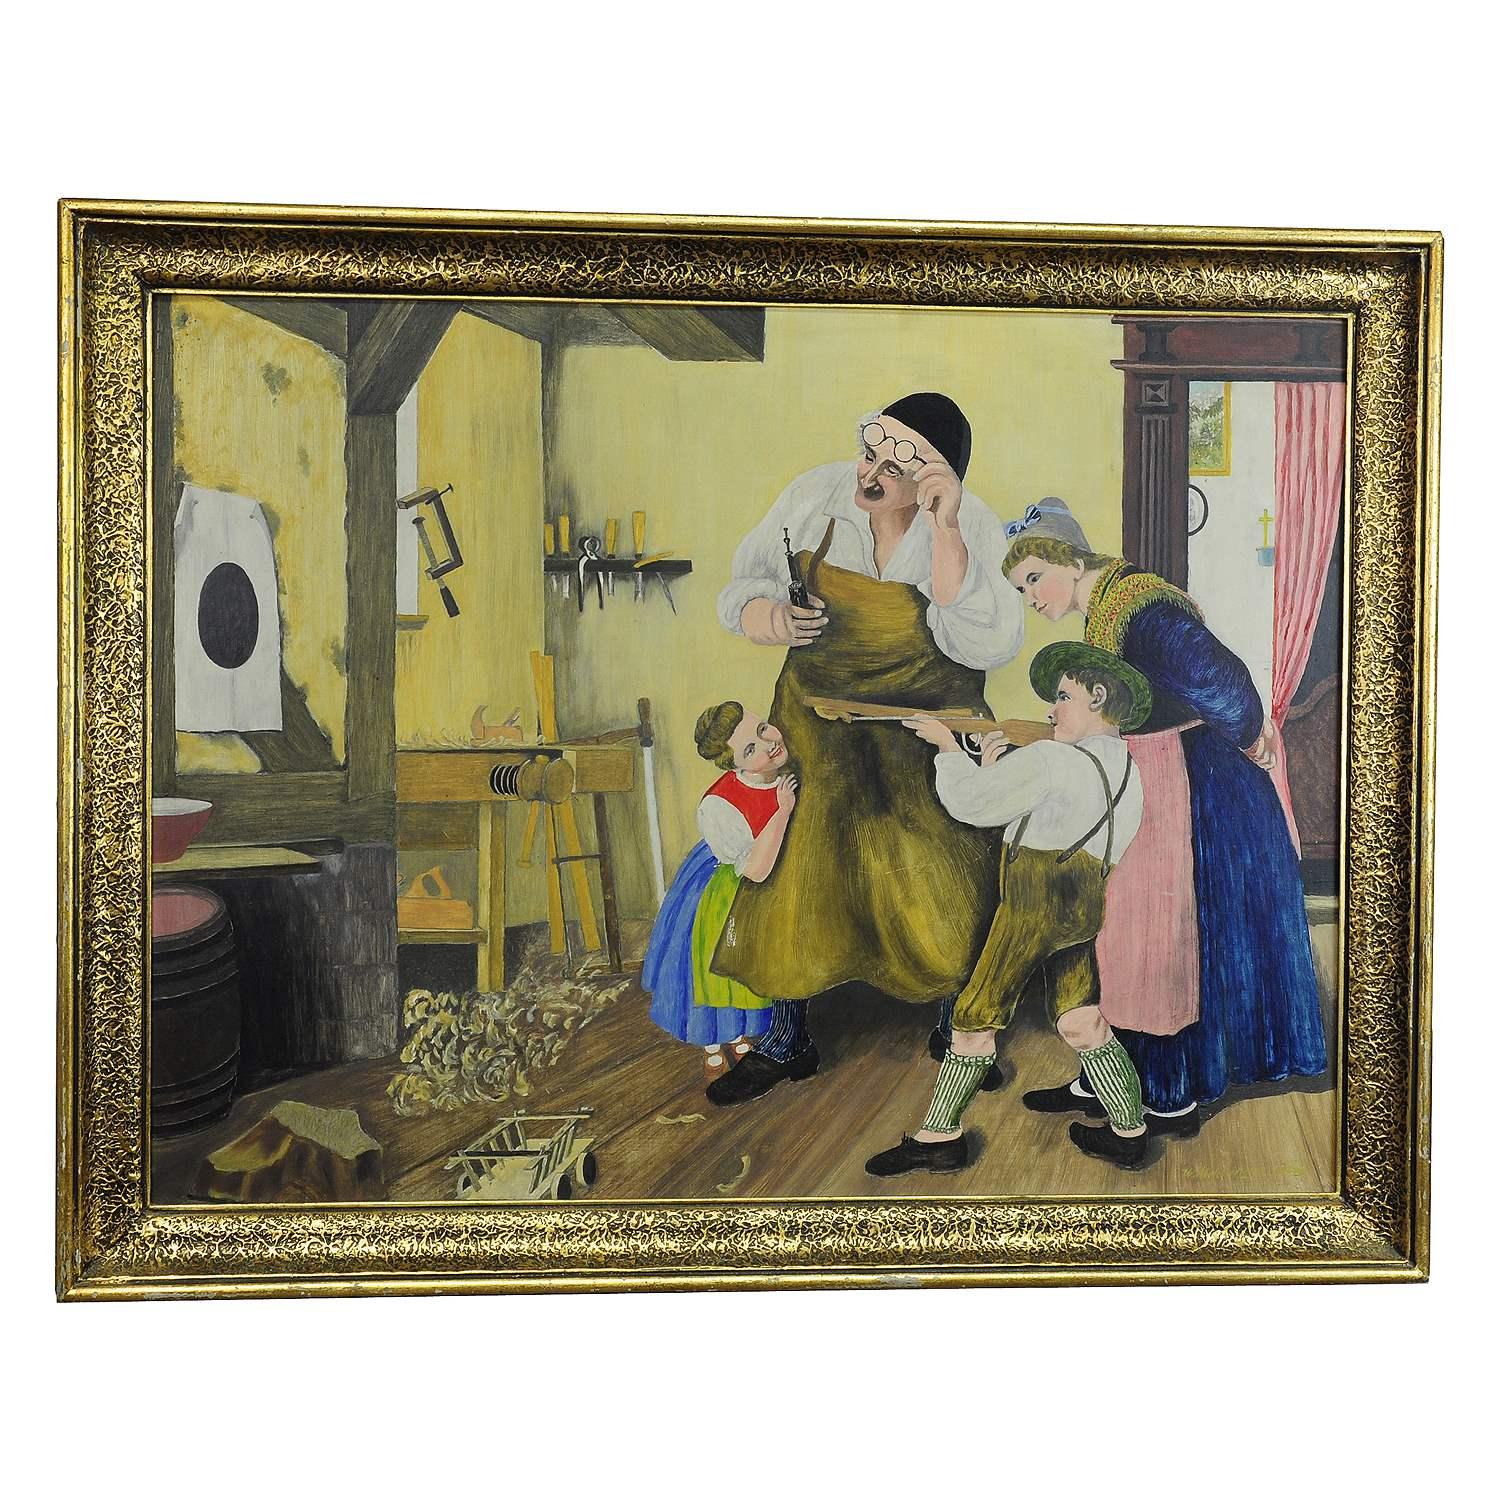 W. Melchinger - Bavarian Folksy Scene in Joinery 1956

An original vintage oil painting showing a Bavarian folksy family scene in the joinery. Painted in oil on cardboard, signed by W. Melchinger 1956. A great original painting in naive